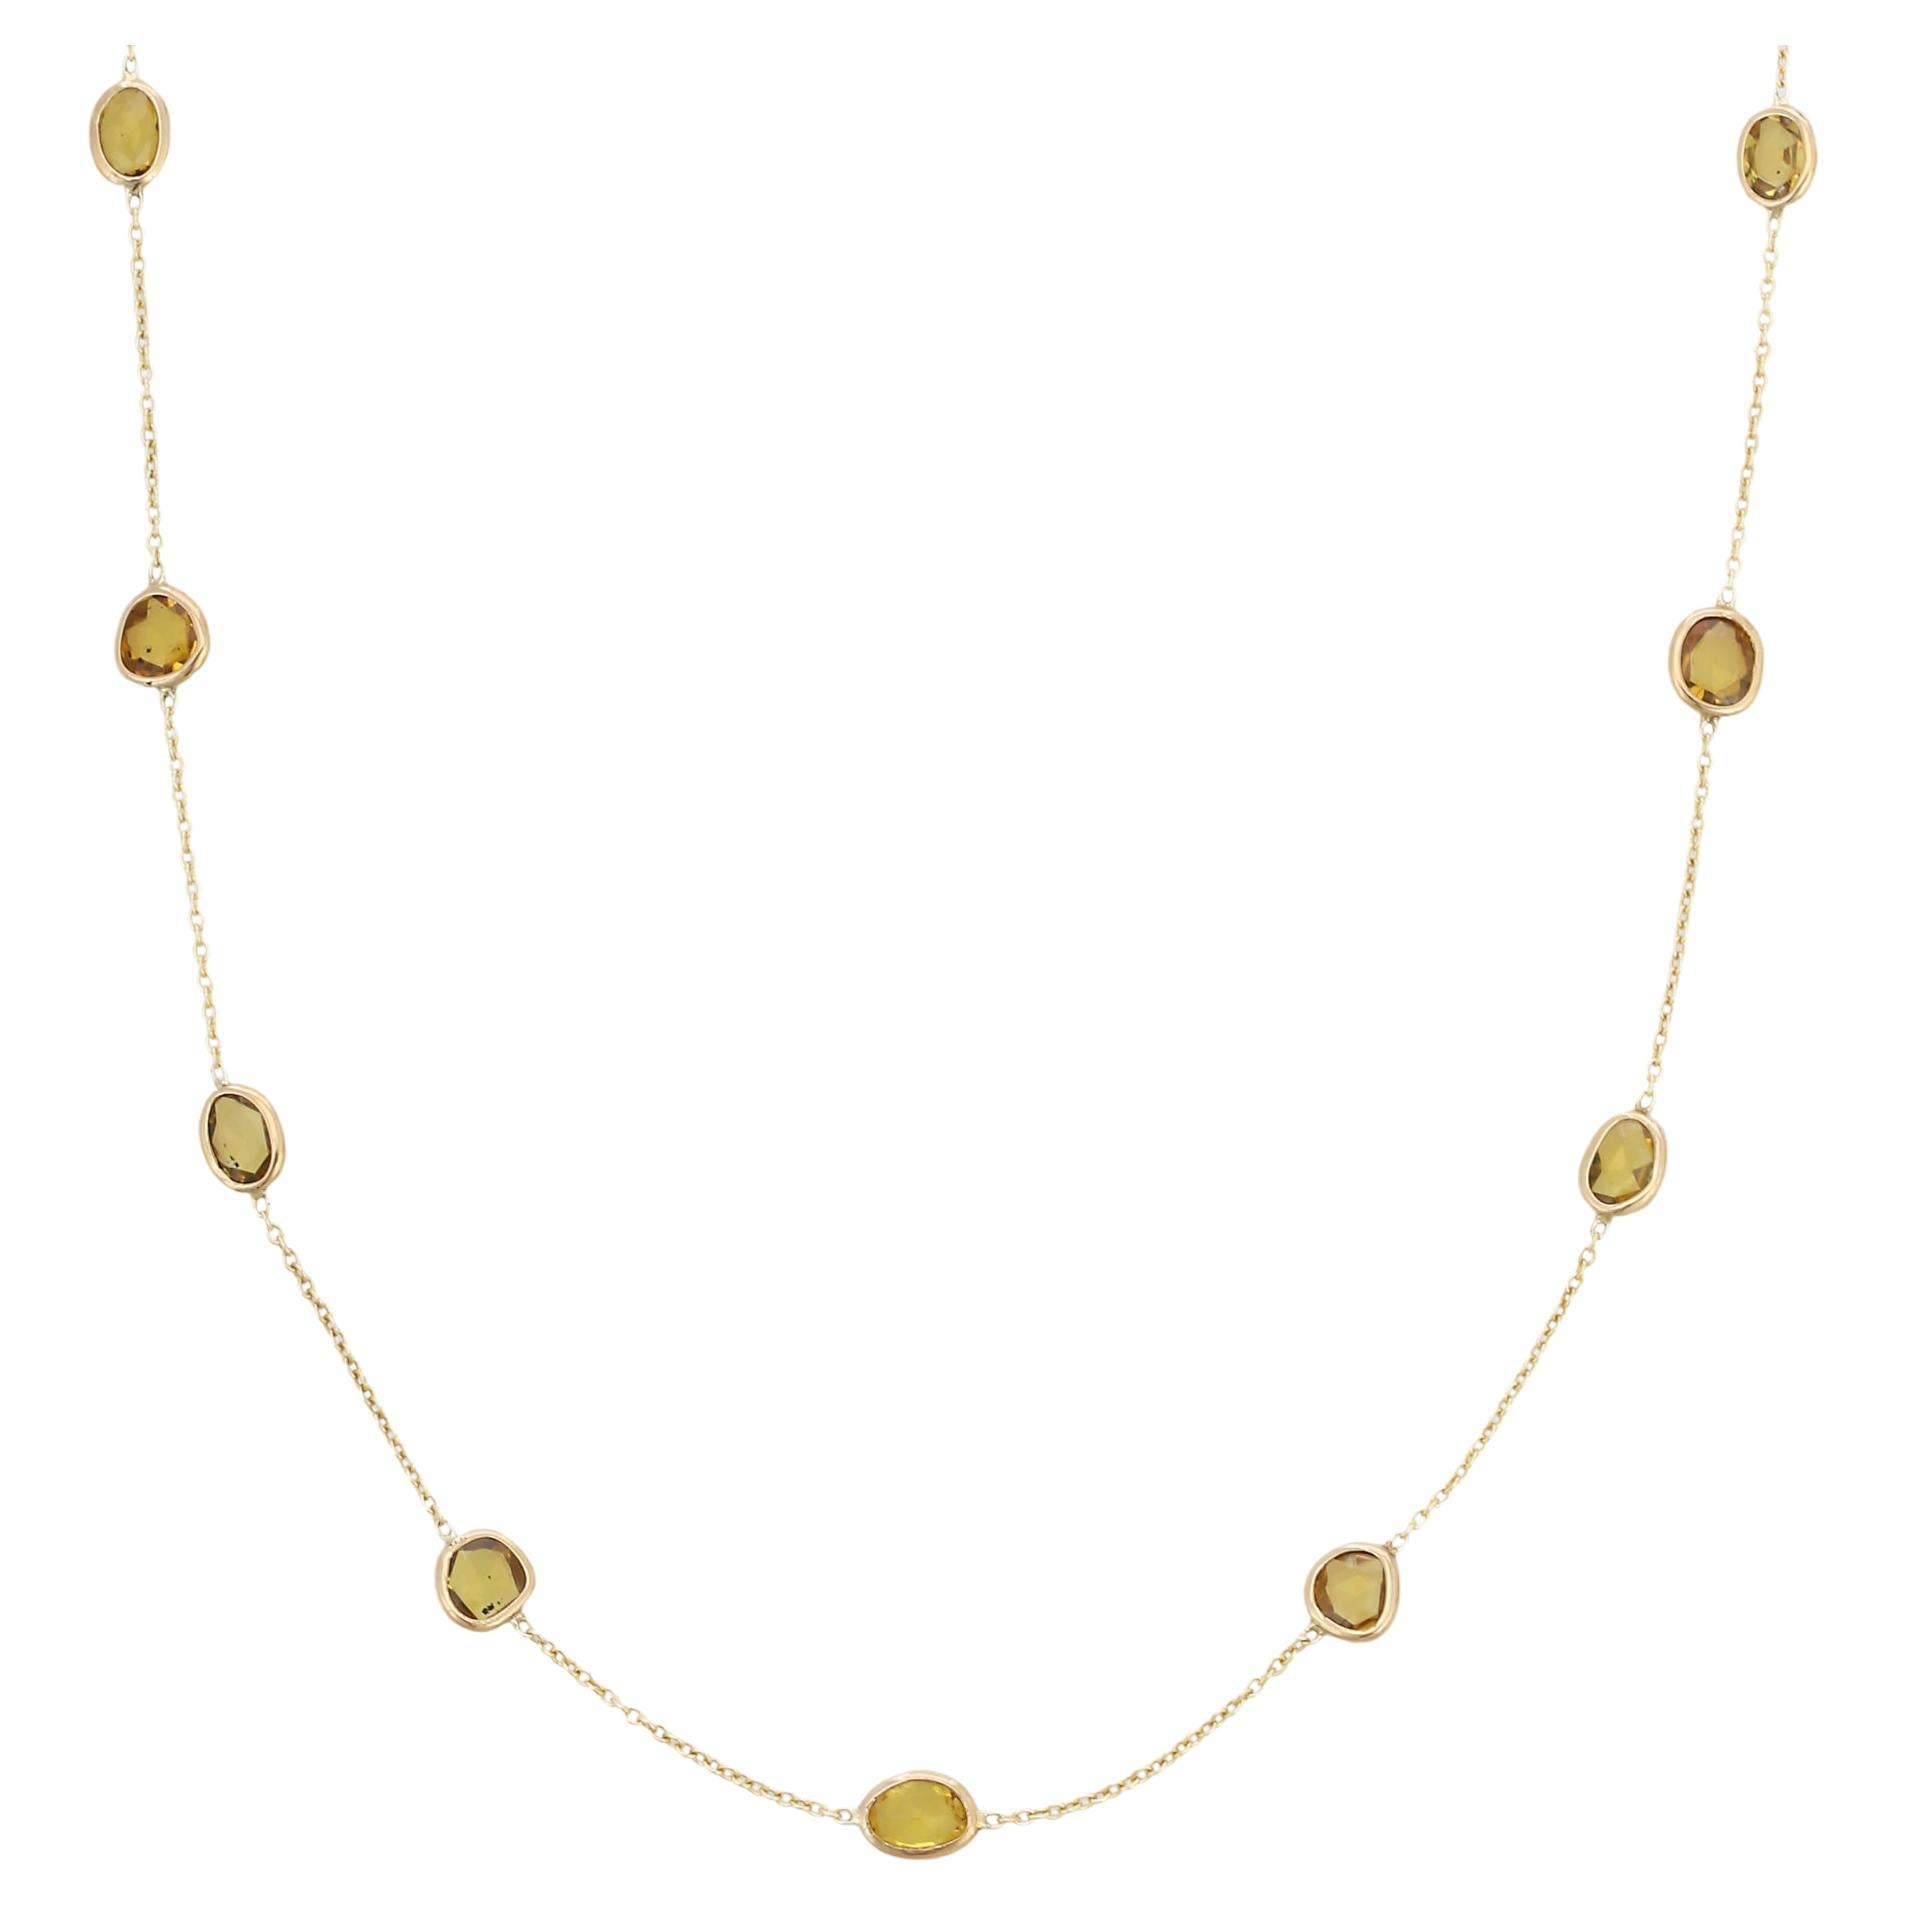 7.65 Ct Yellow Sapphire Station Chain Necklace 14k Yellow Gold, Grandma Gift For Sale